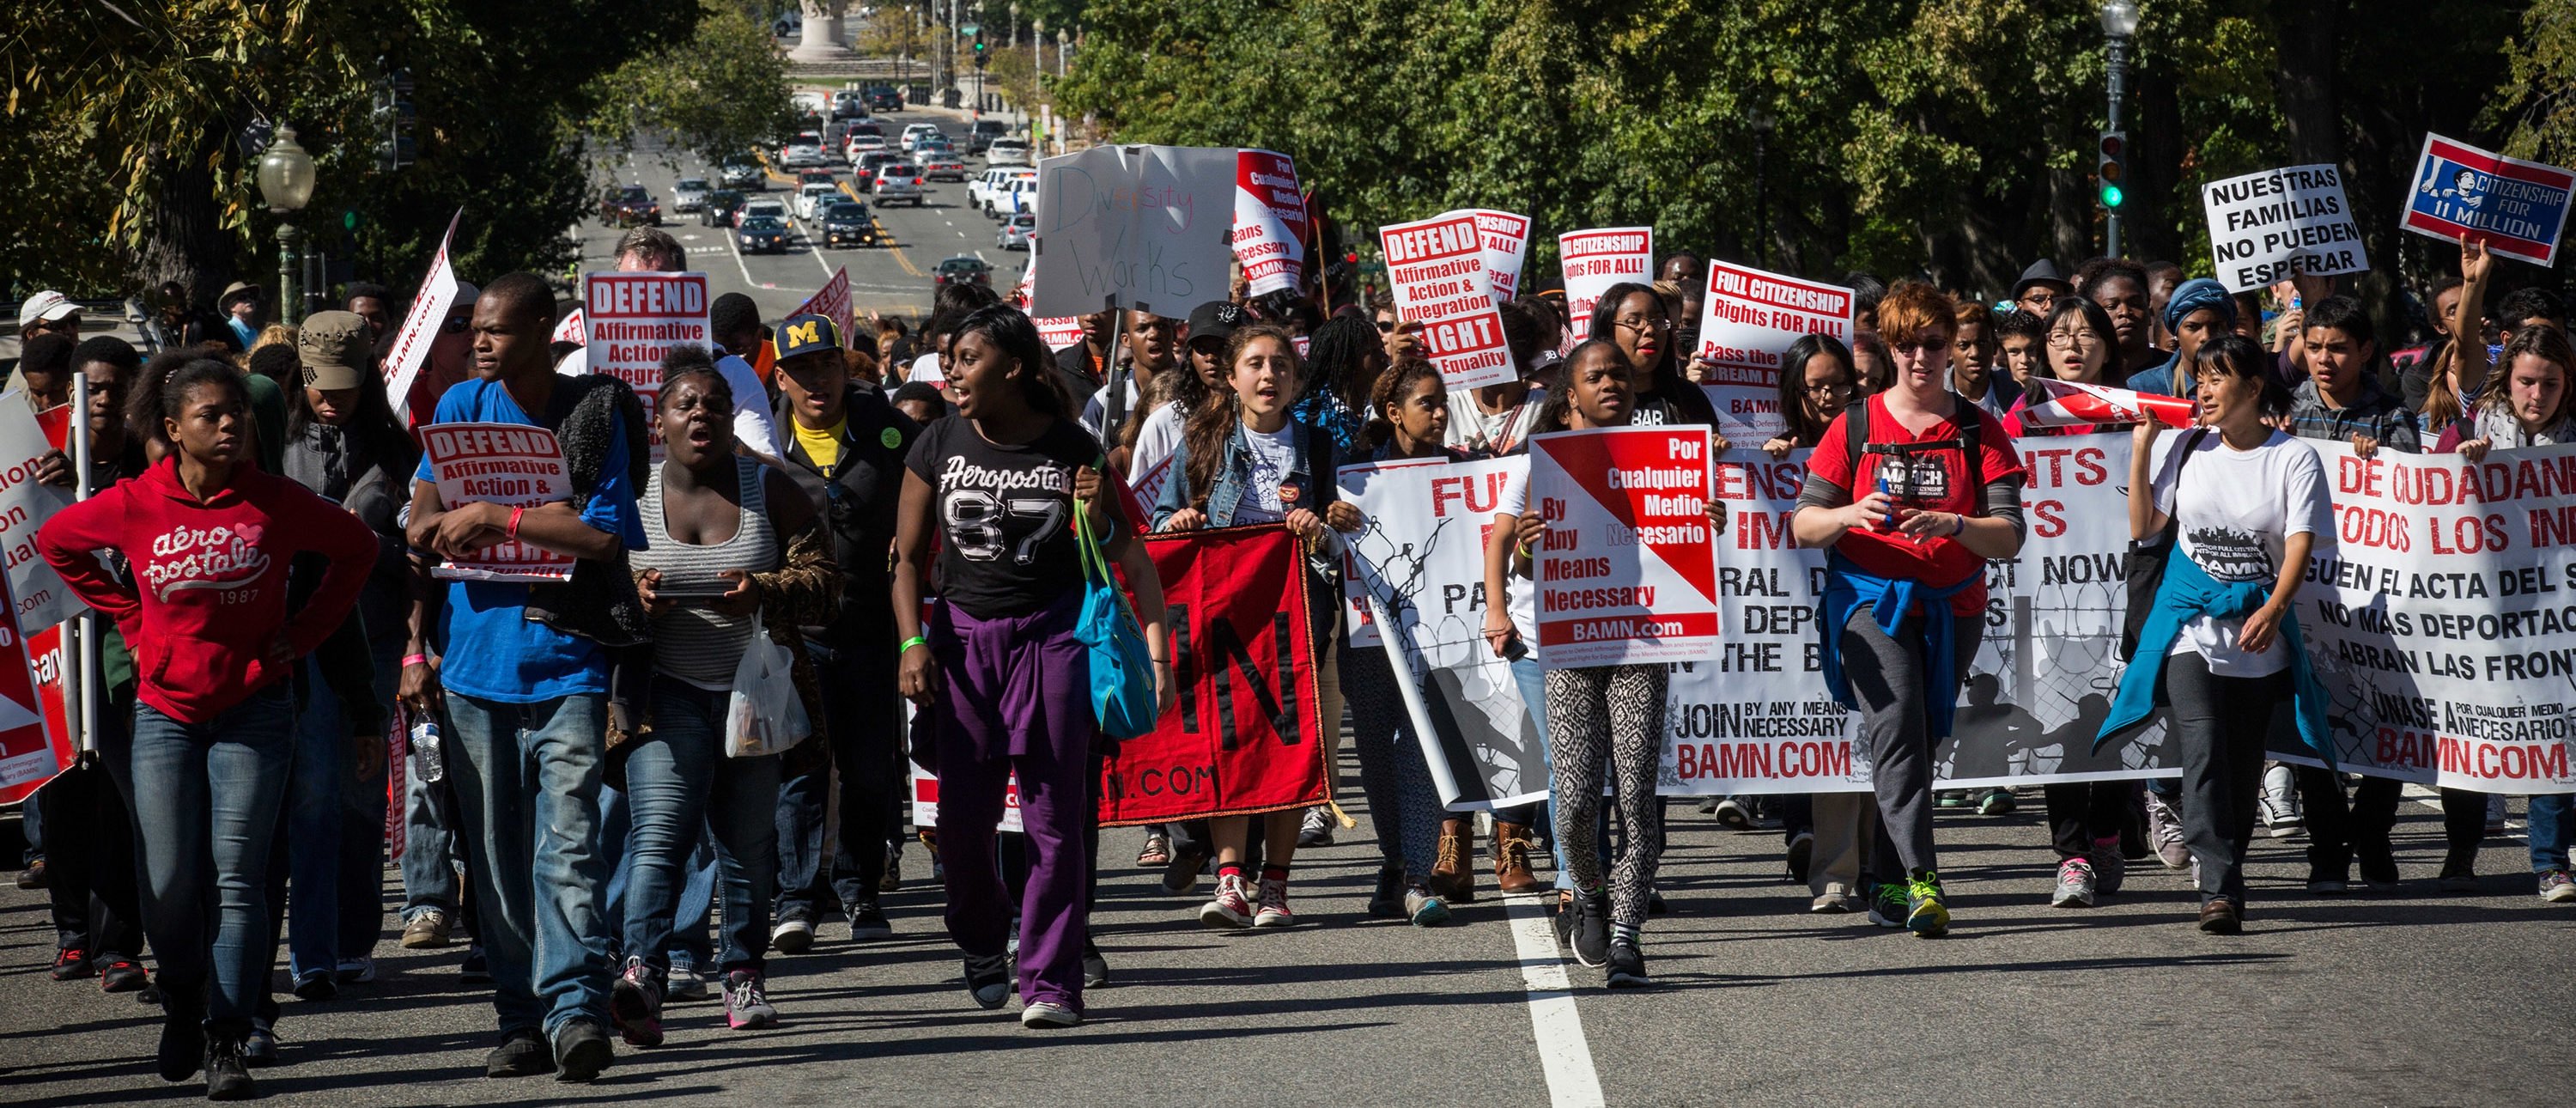 WASHINGTON, DC - OCTOBER 15: Students march from the Lincoln Memorial to the U.S. Supreme Court prior to the hearing of "Schuette v. Coalition to Defend Affirmative Action" on October 15, 2013 in Washington, DC. The case revolves around affirmative action and whether or not states have the right to ban schools from using race as a consideration in school admissions. (Photo by Andrew Burton/Getty Images)